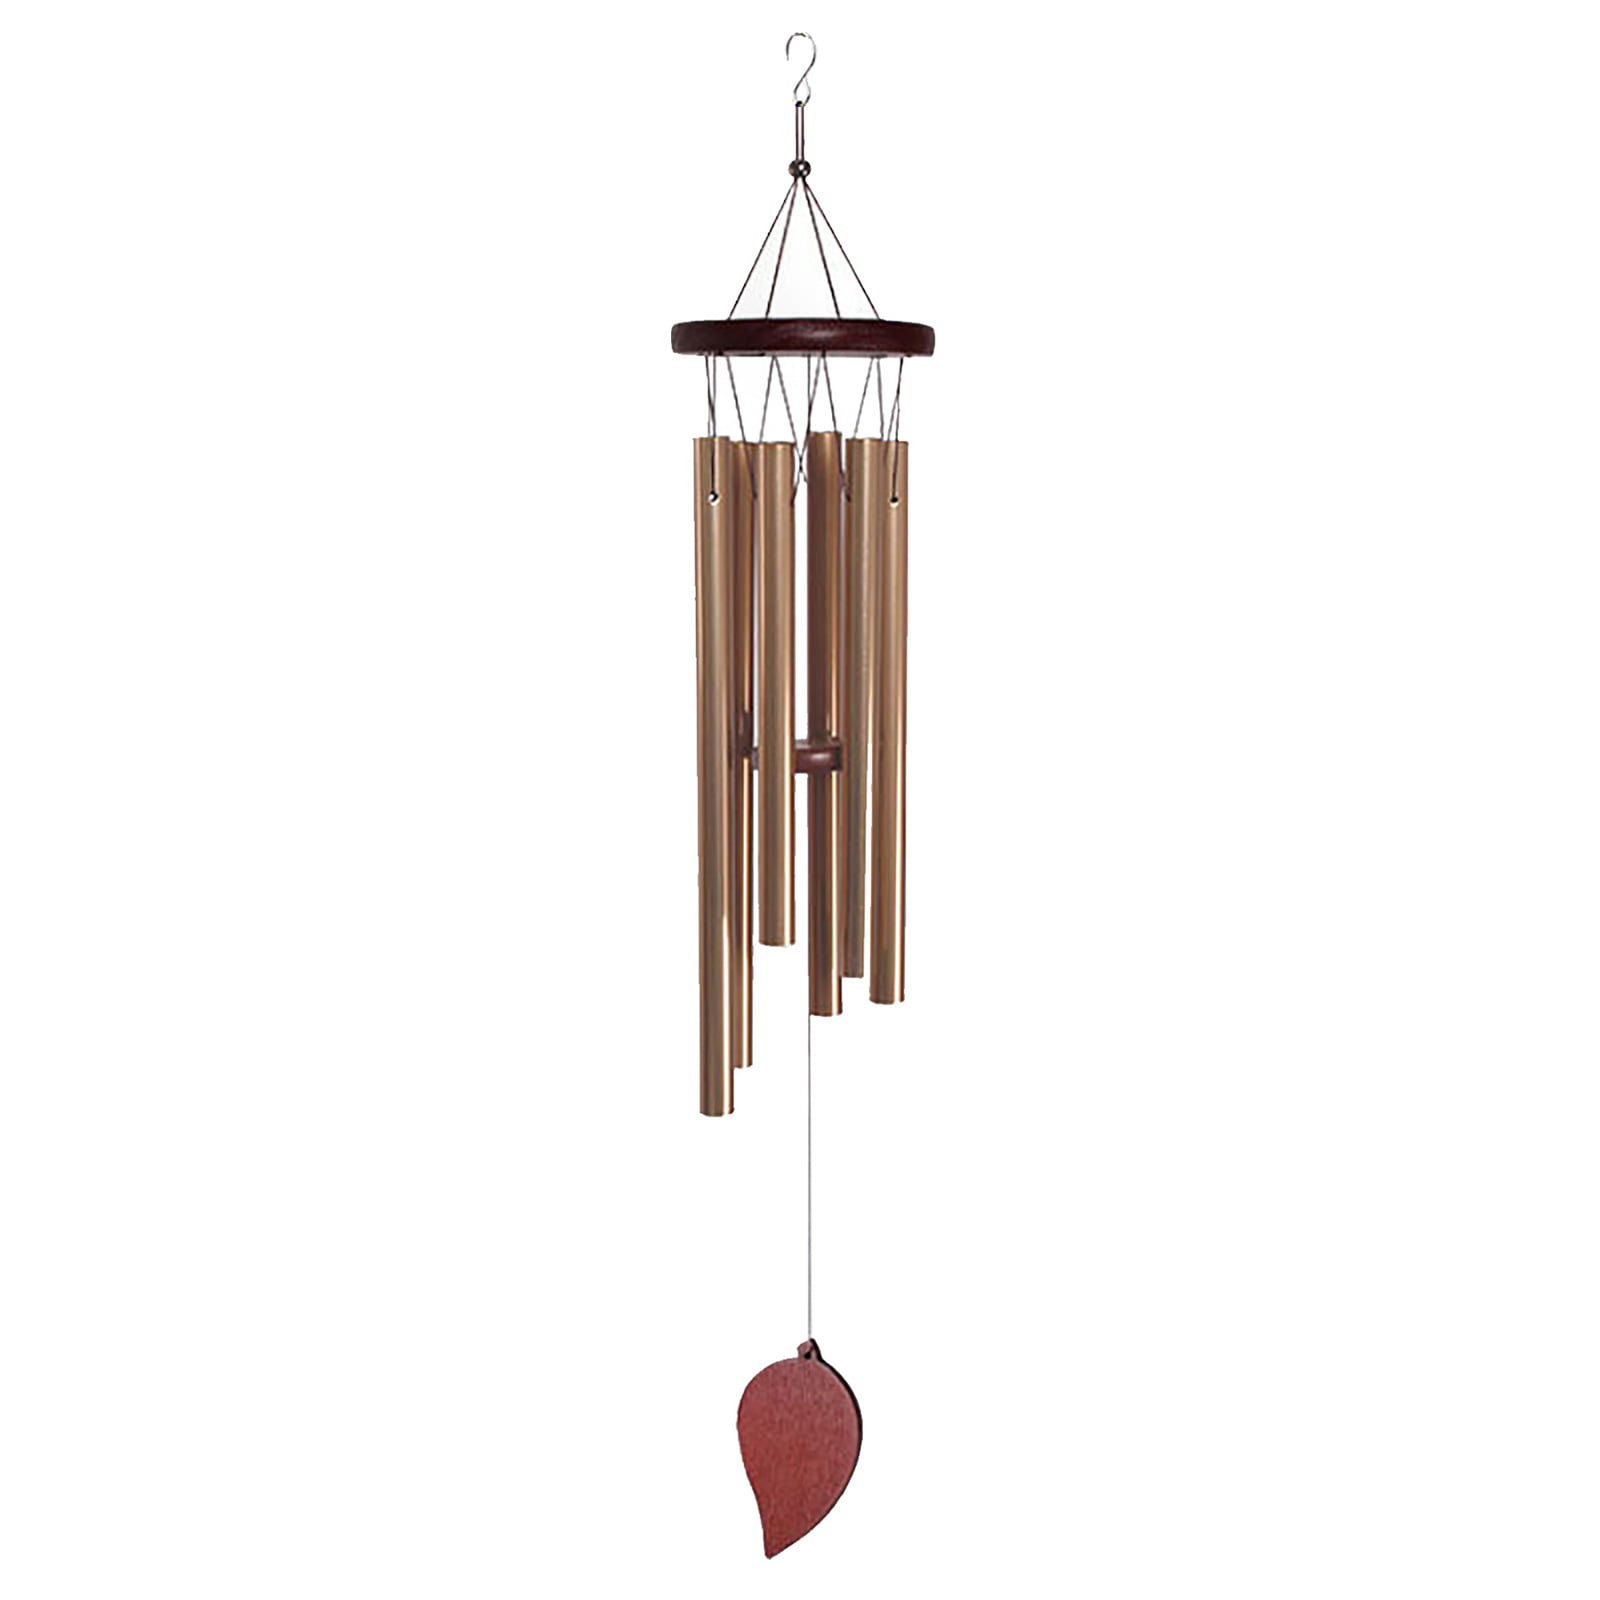 78cm Wind Chimes Large 6 Tubes Tone Resonant Bell Outdoor Church Garden Decor 